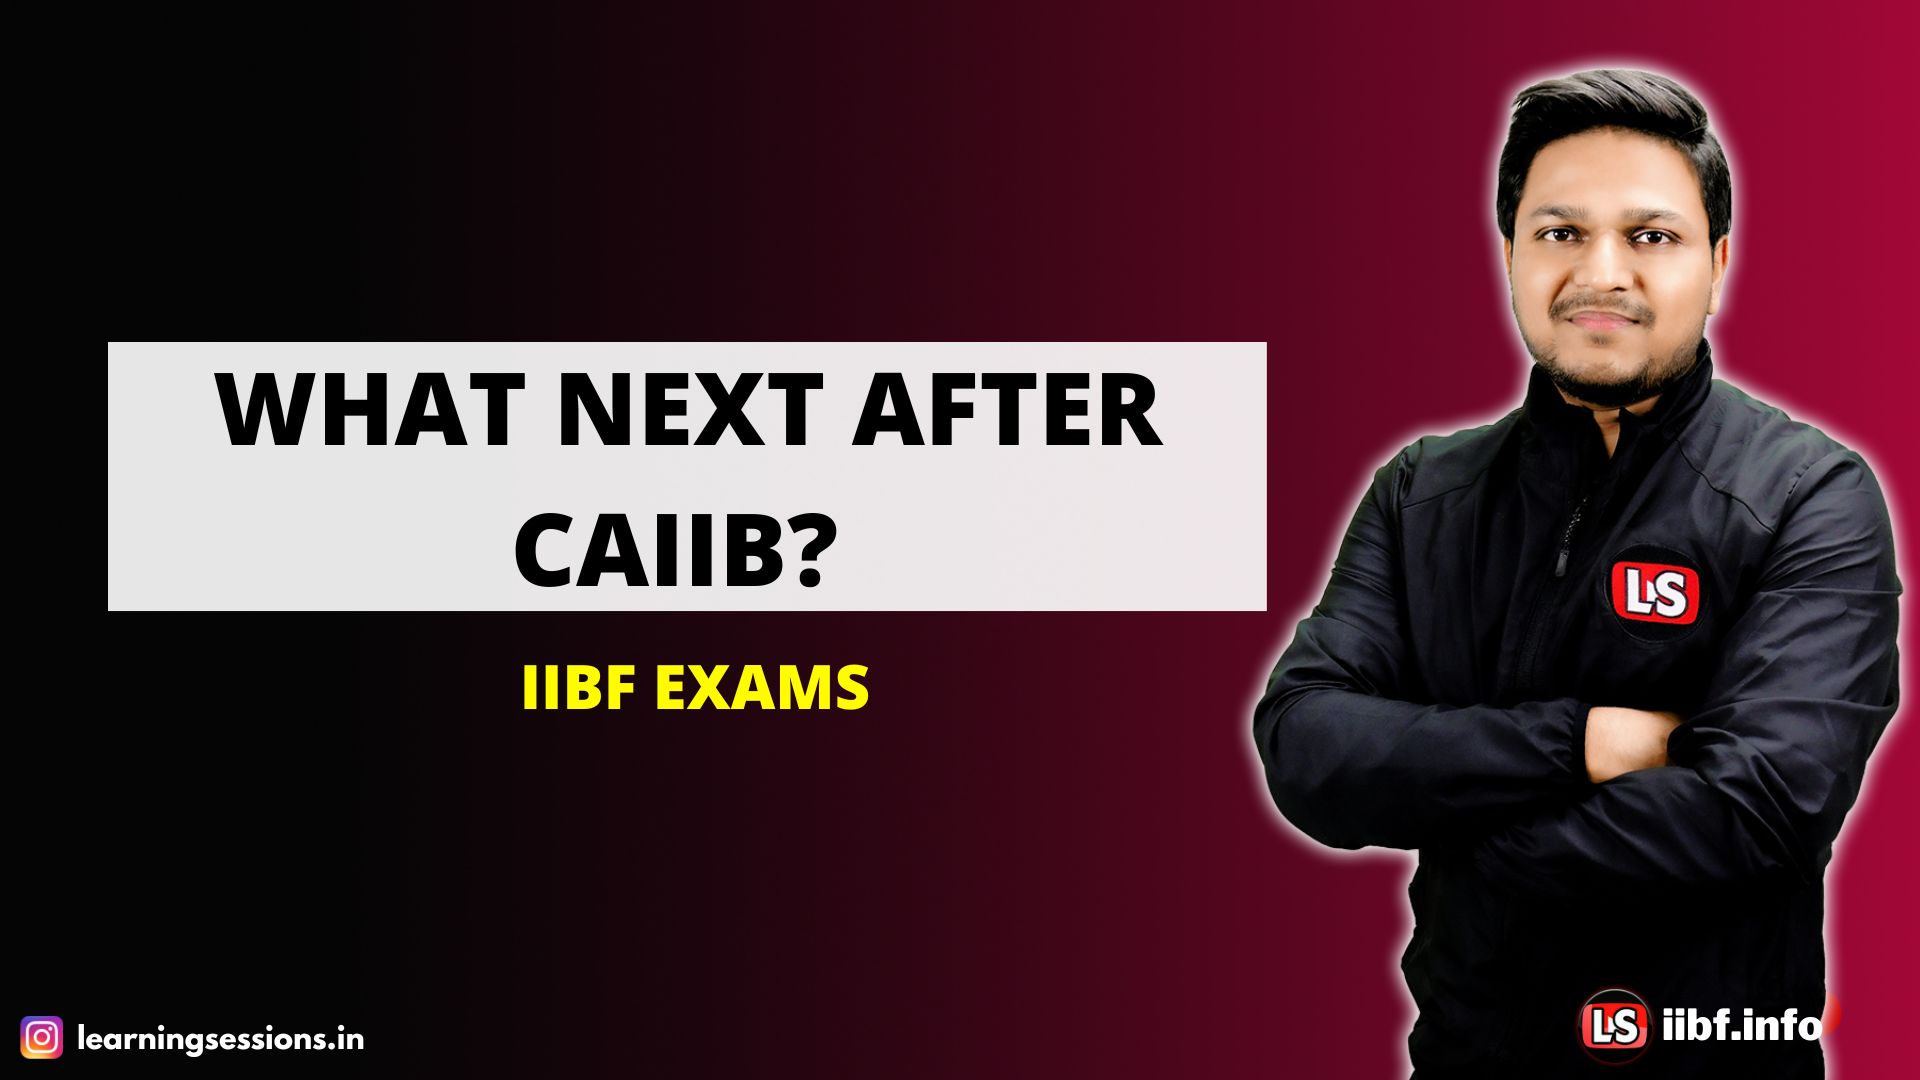 WHAT NEXT AFTER CAIIB? | CAREER OPPORTUNITIES AFTER CAIIB | IIBF EXAMS 2023